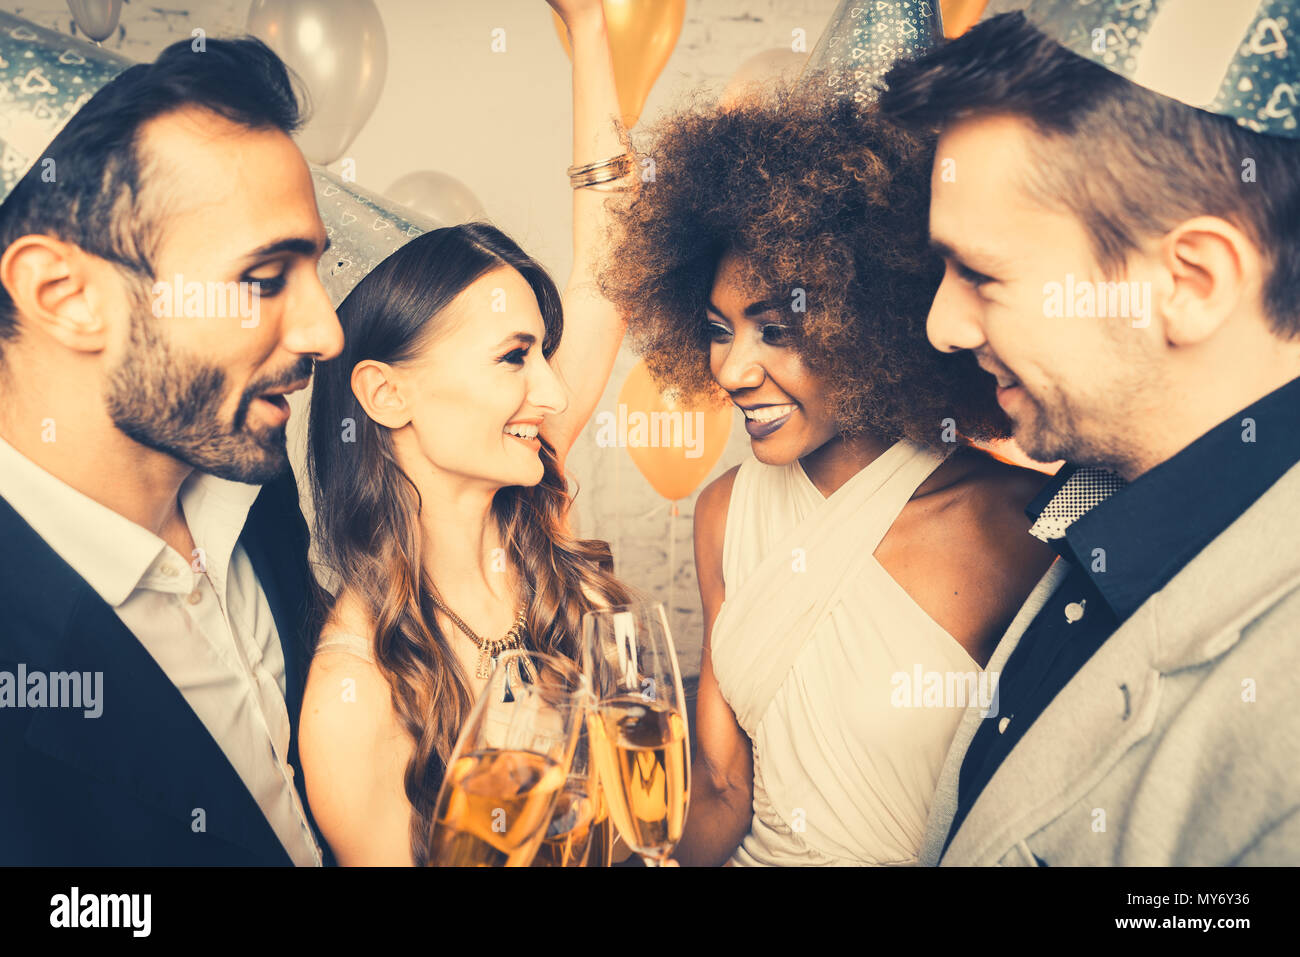 Men and women celebrating party while clinking glasses Stock Photo